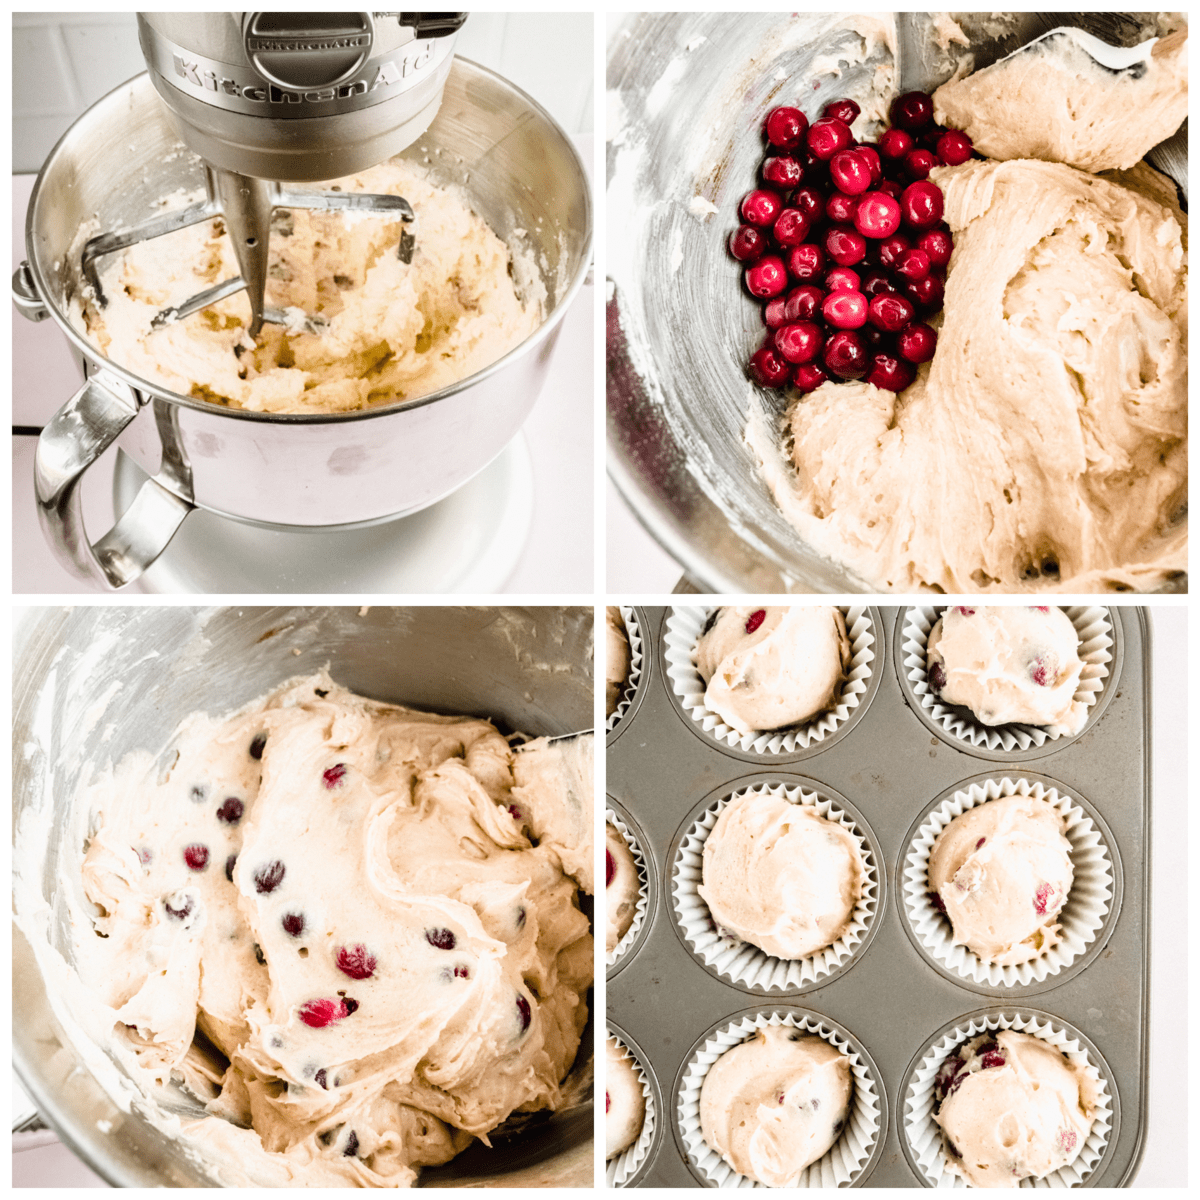 cranberry orange muffin step by step process